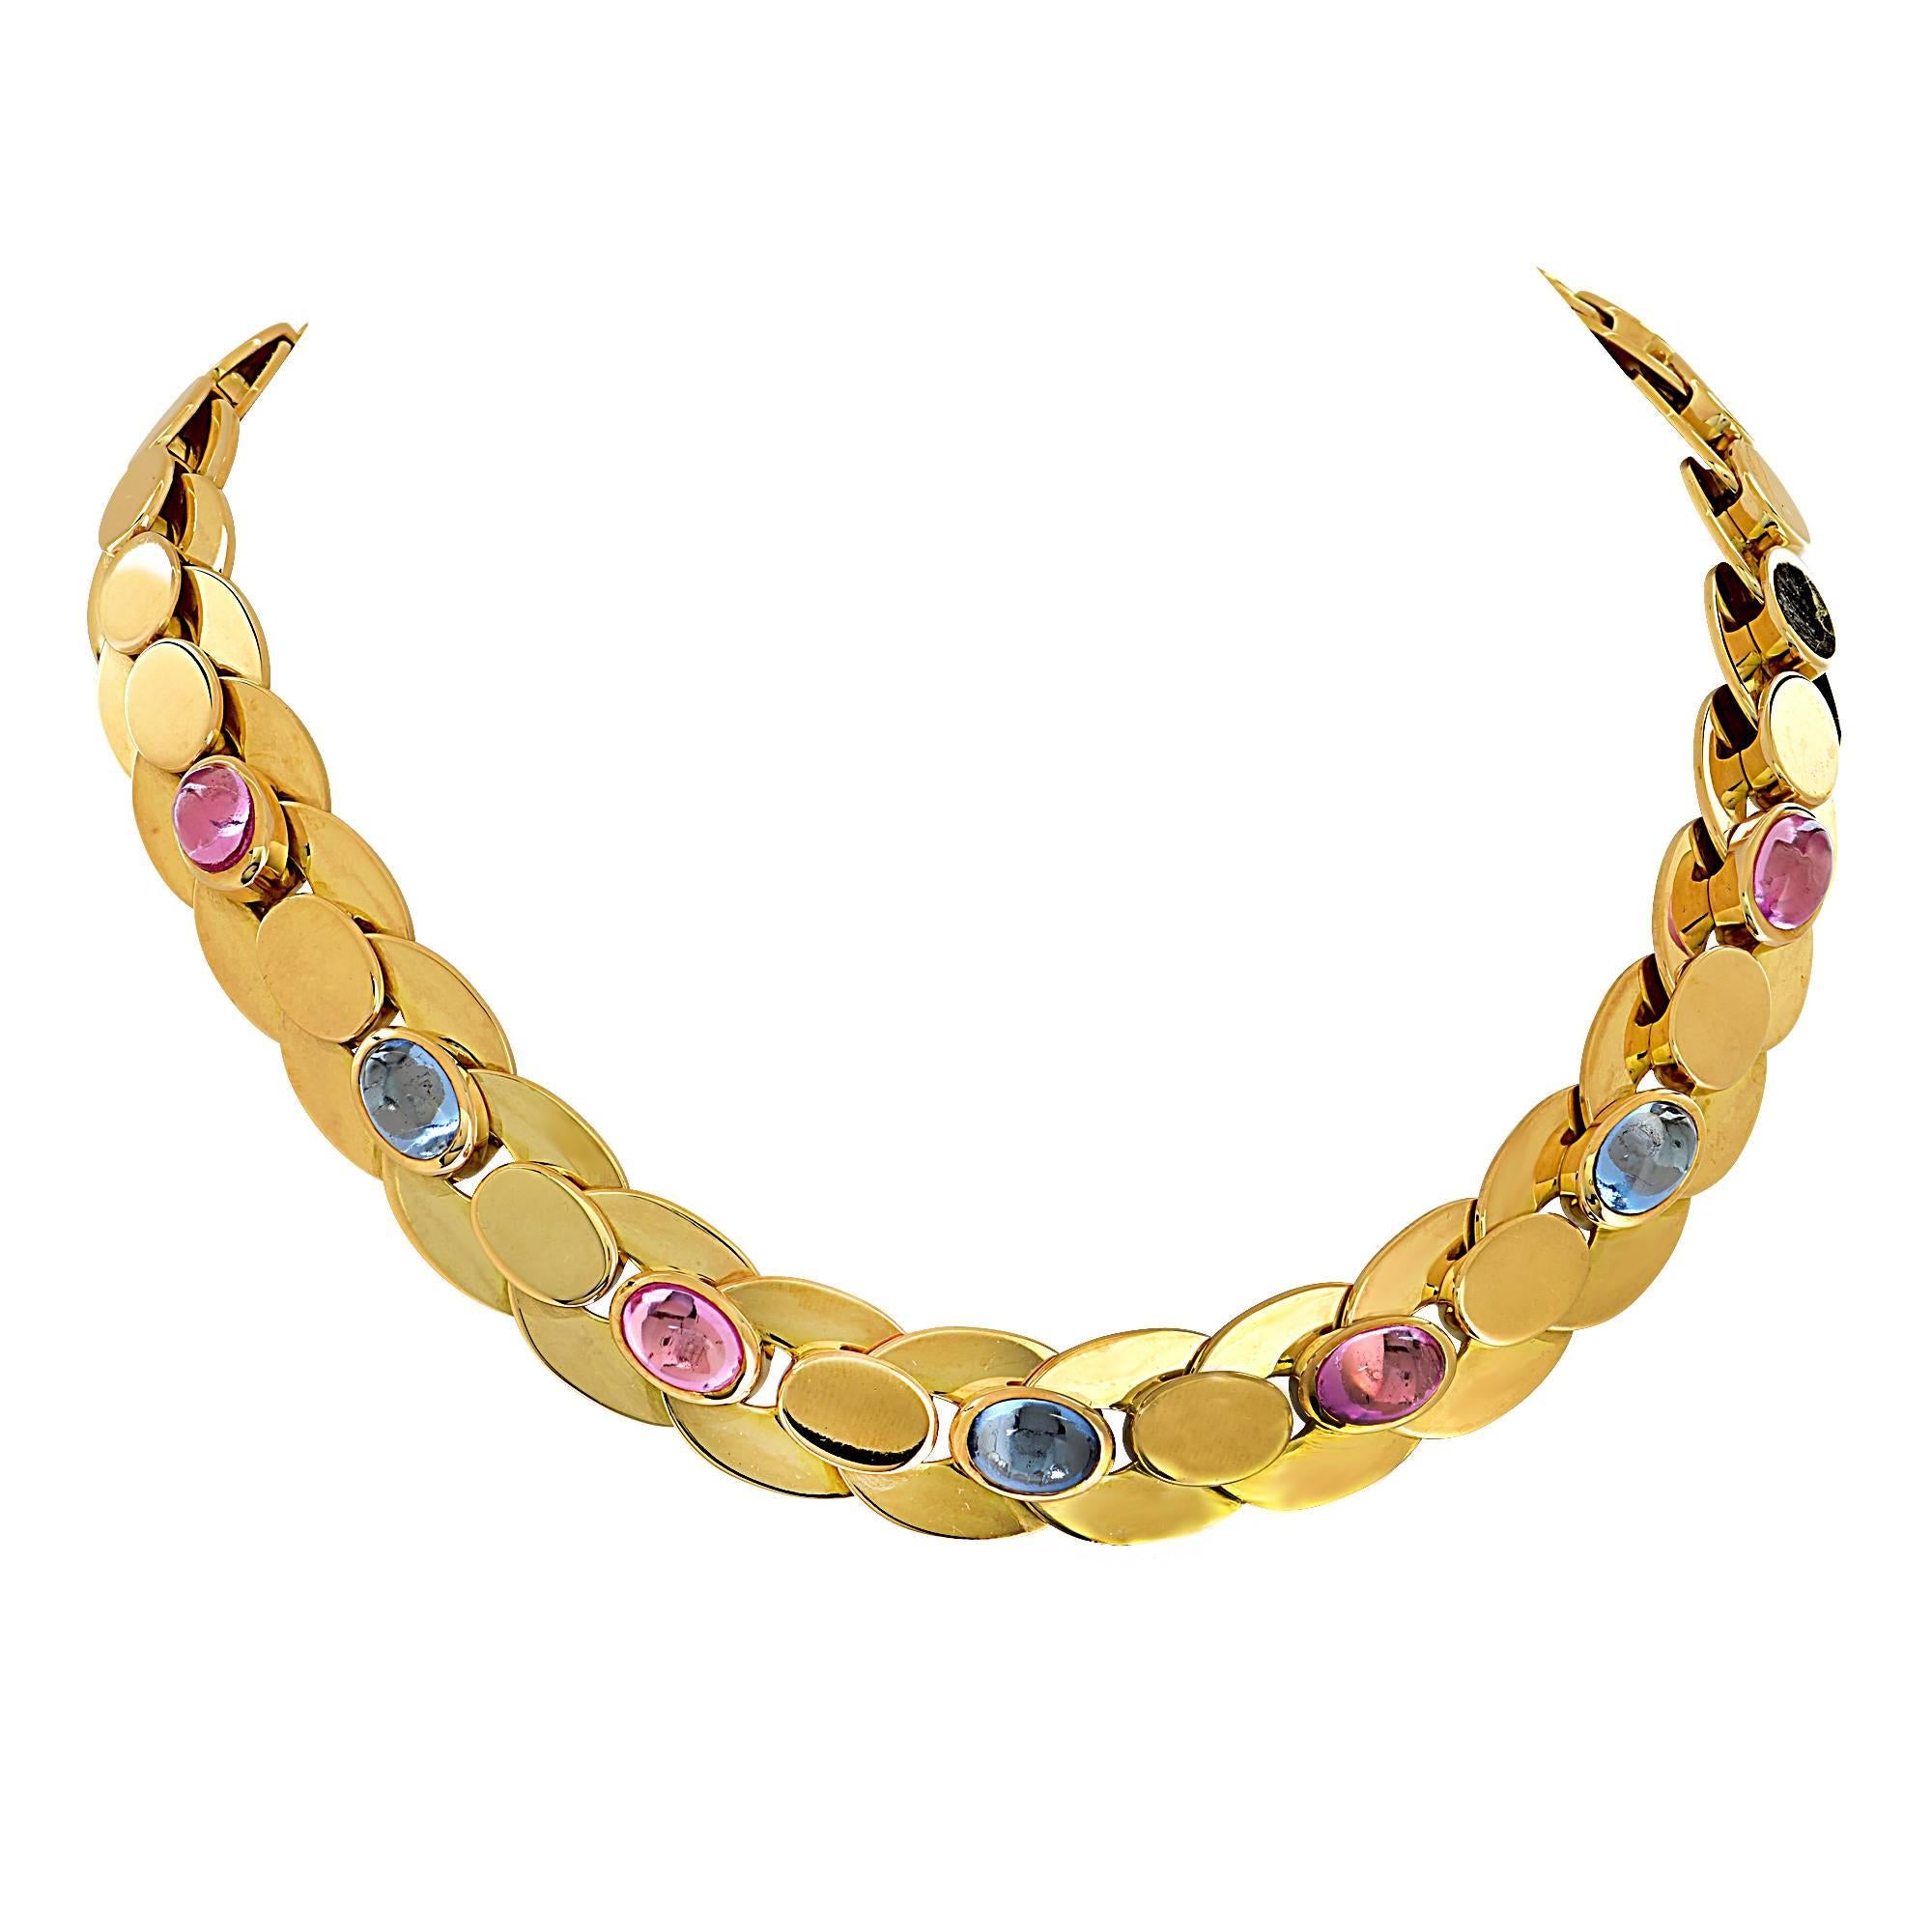 This gorgeous 18K yellow gold necklace is a classical part of the high jewelry necklace collection created by Marina B. The unique interlocking 18k yellow gold moving links ensure that the necklace lays comfortably and form fits to the neck.